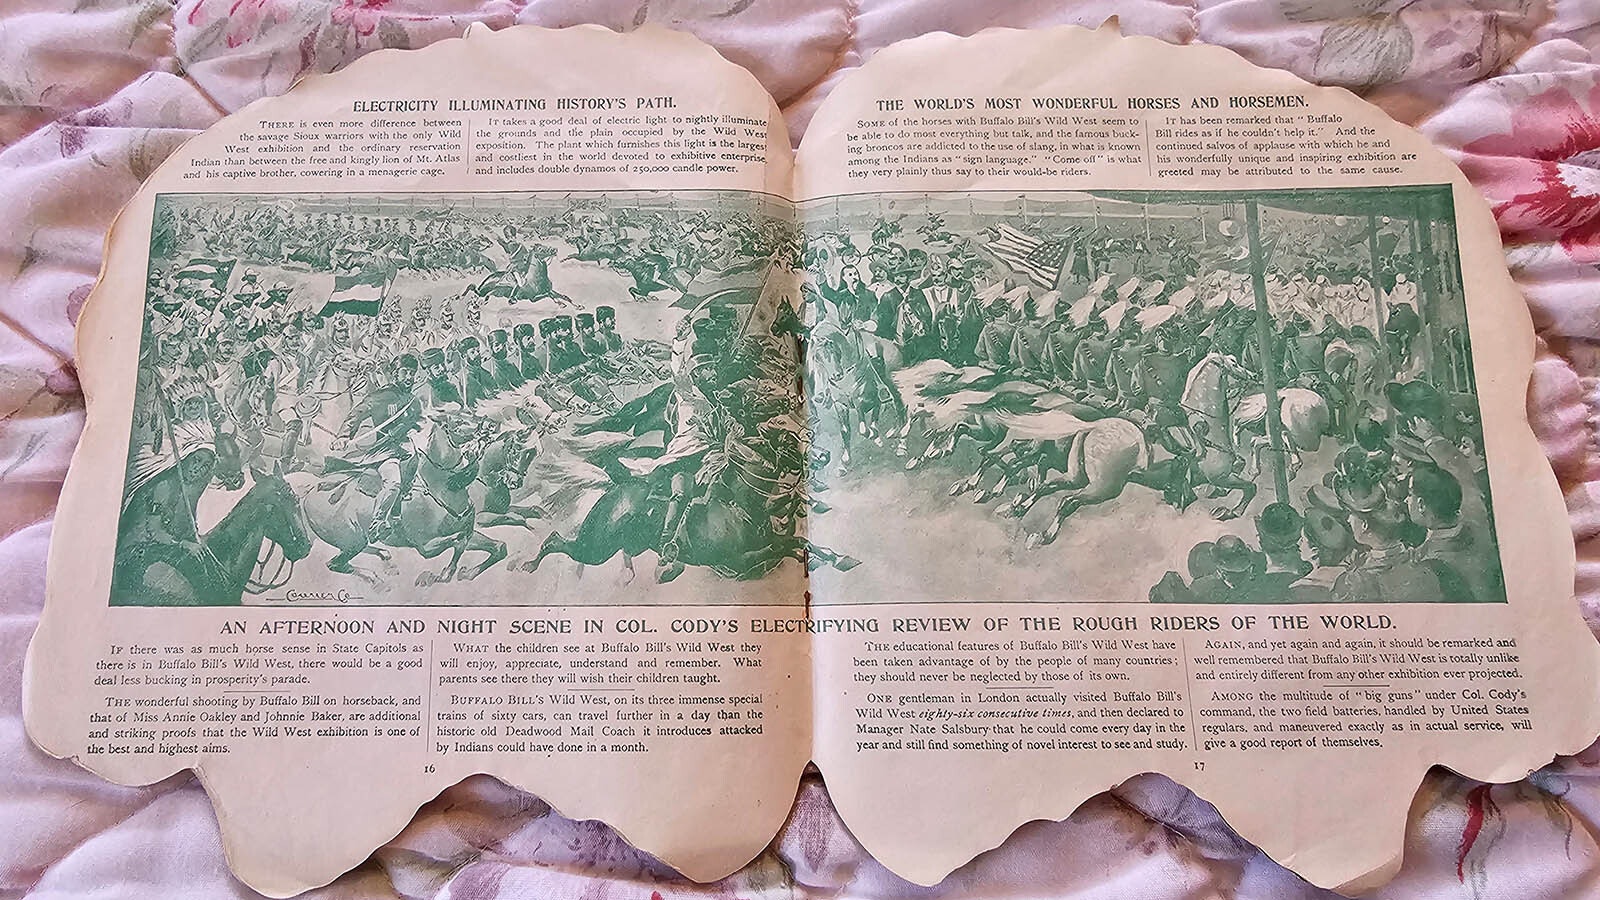 The center spread of the Buffalo Bill Cody Wild West Show program from 1898.